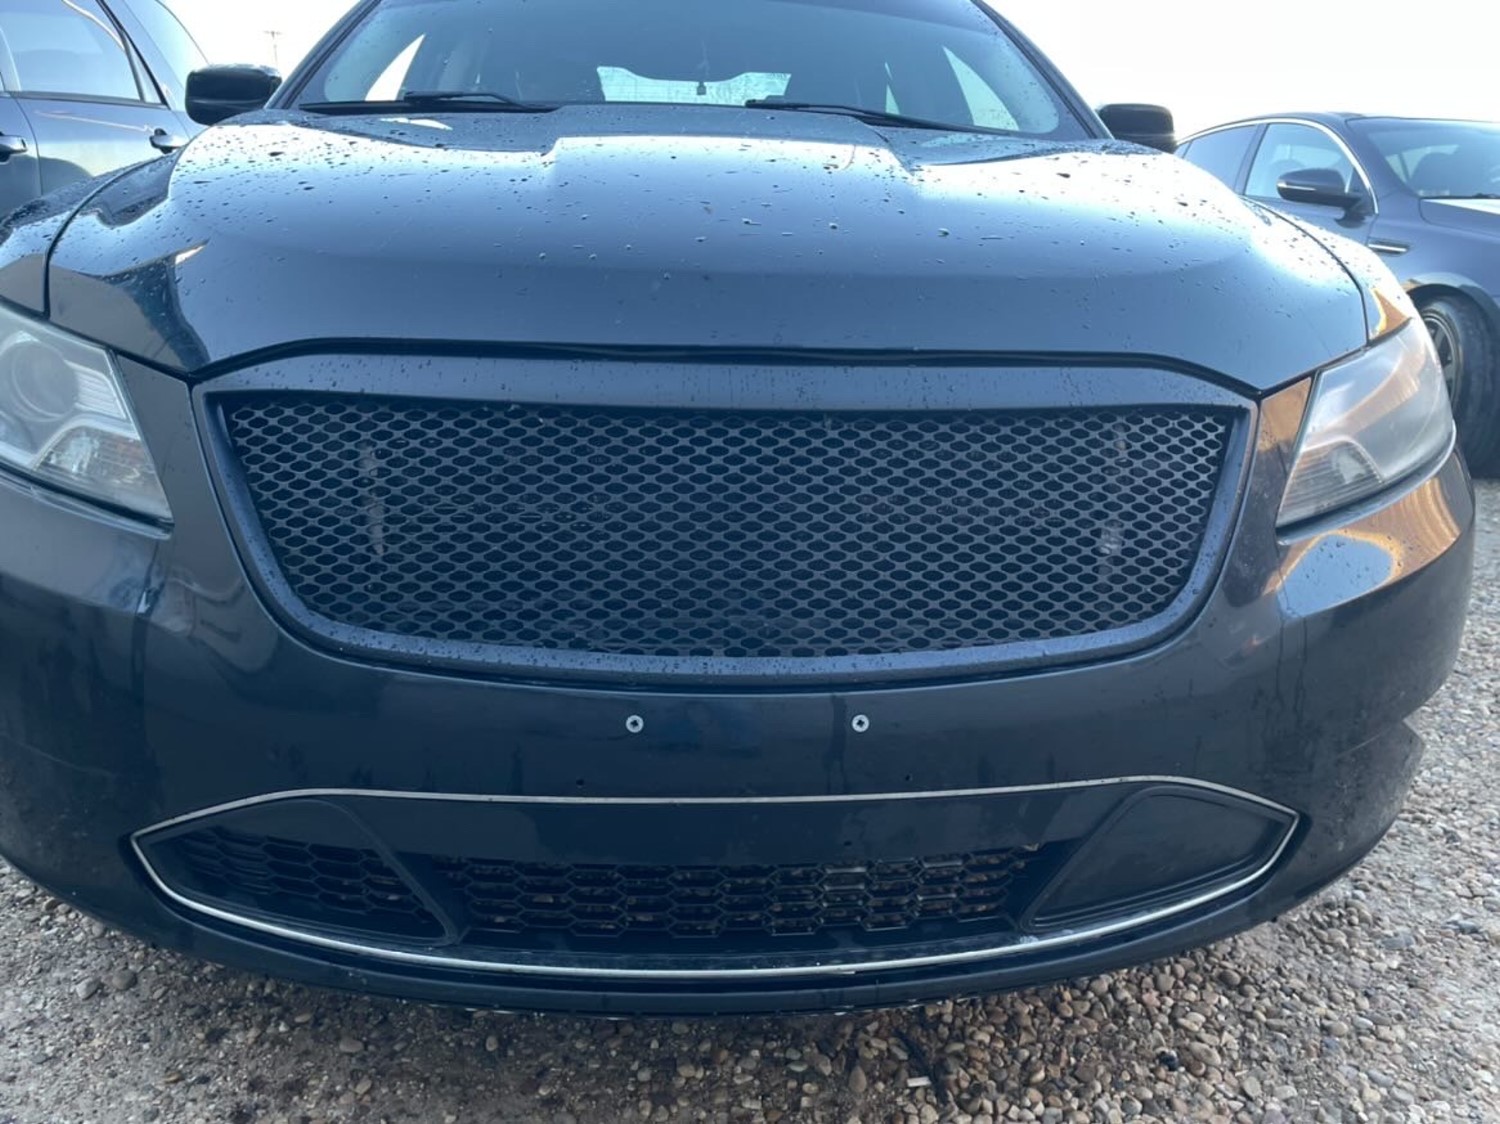 Ford Taurus 2010-2012 Mesh Grill Installation How-To by customcargrills.com  